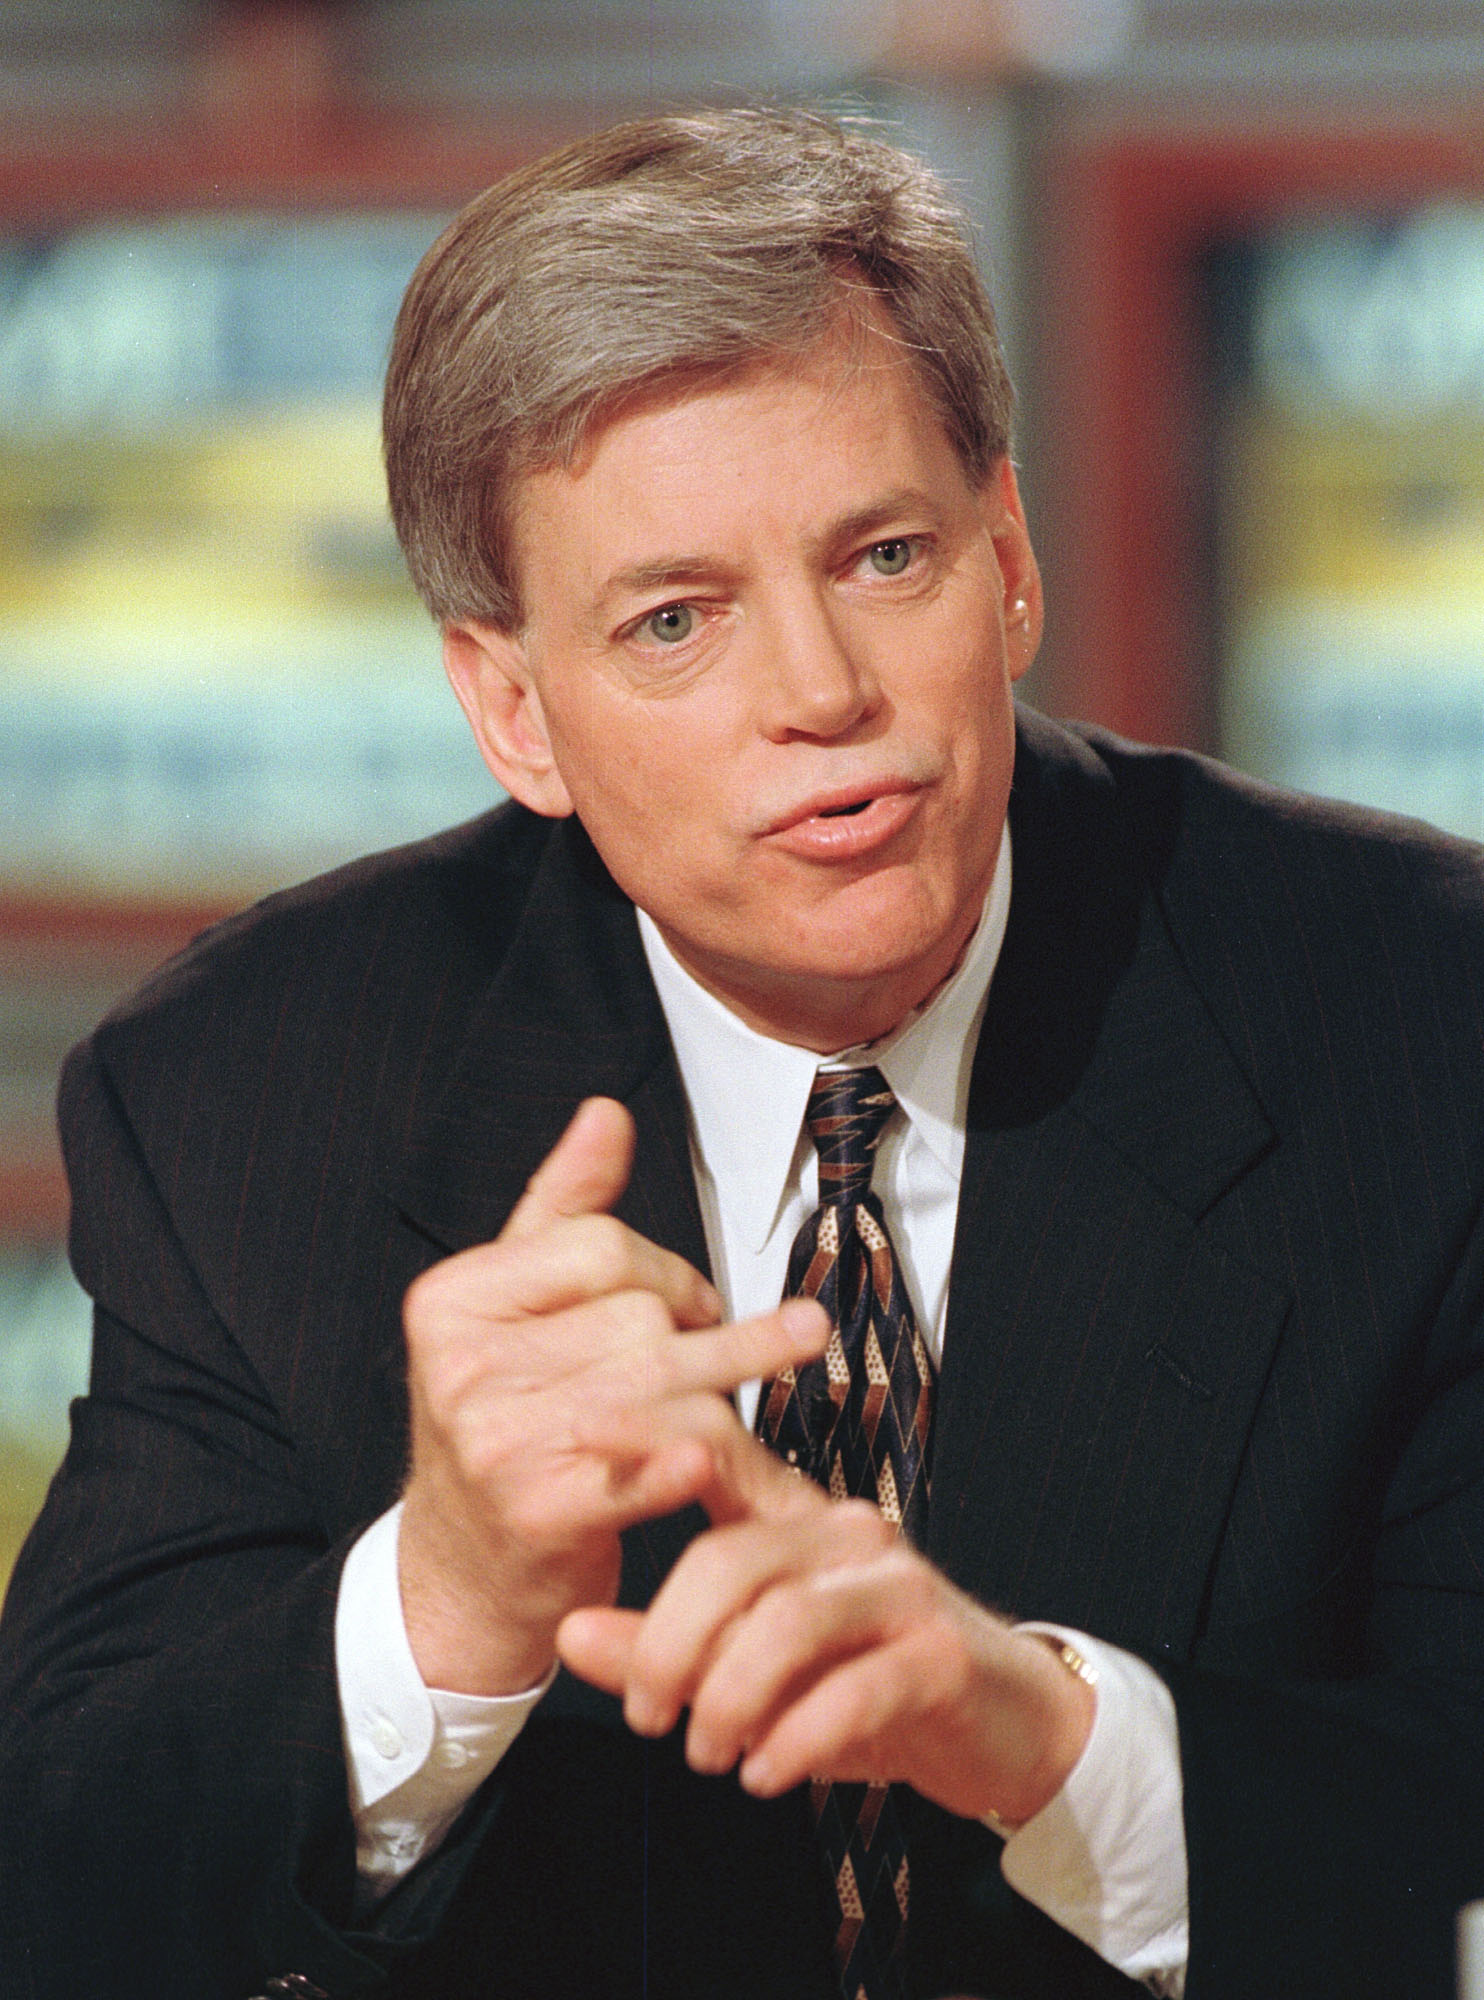 Former Klansman and congressional candidate David Duke discusses his bid for the seat opened by Rep. Bob Livingston during NBC's ''Meet the Press'' on March 28, 1999 in Washington.